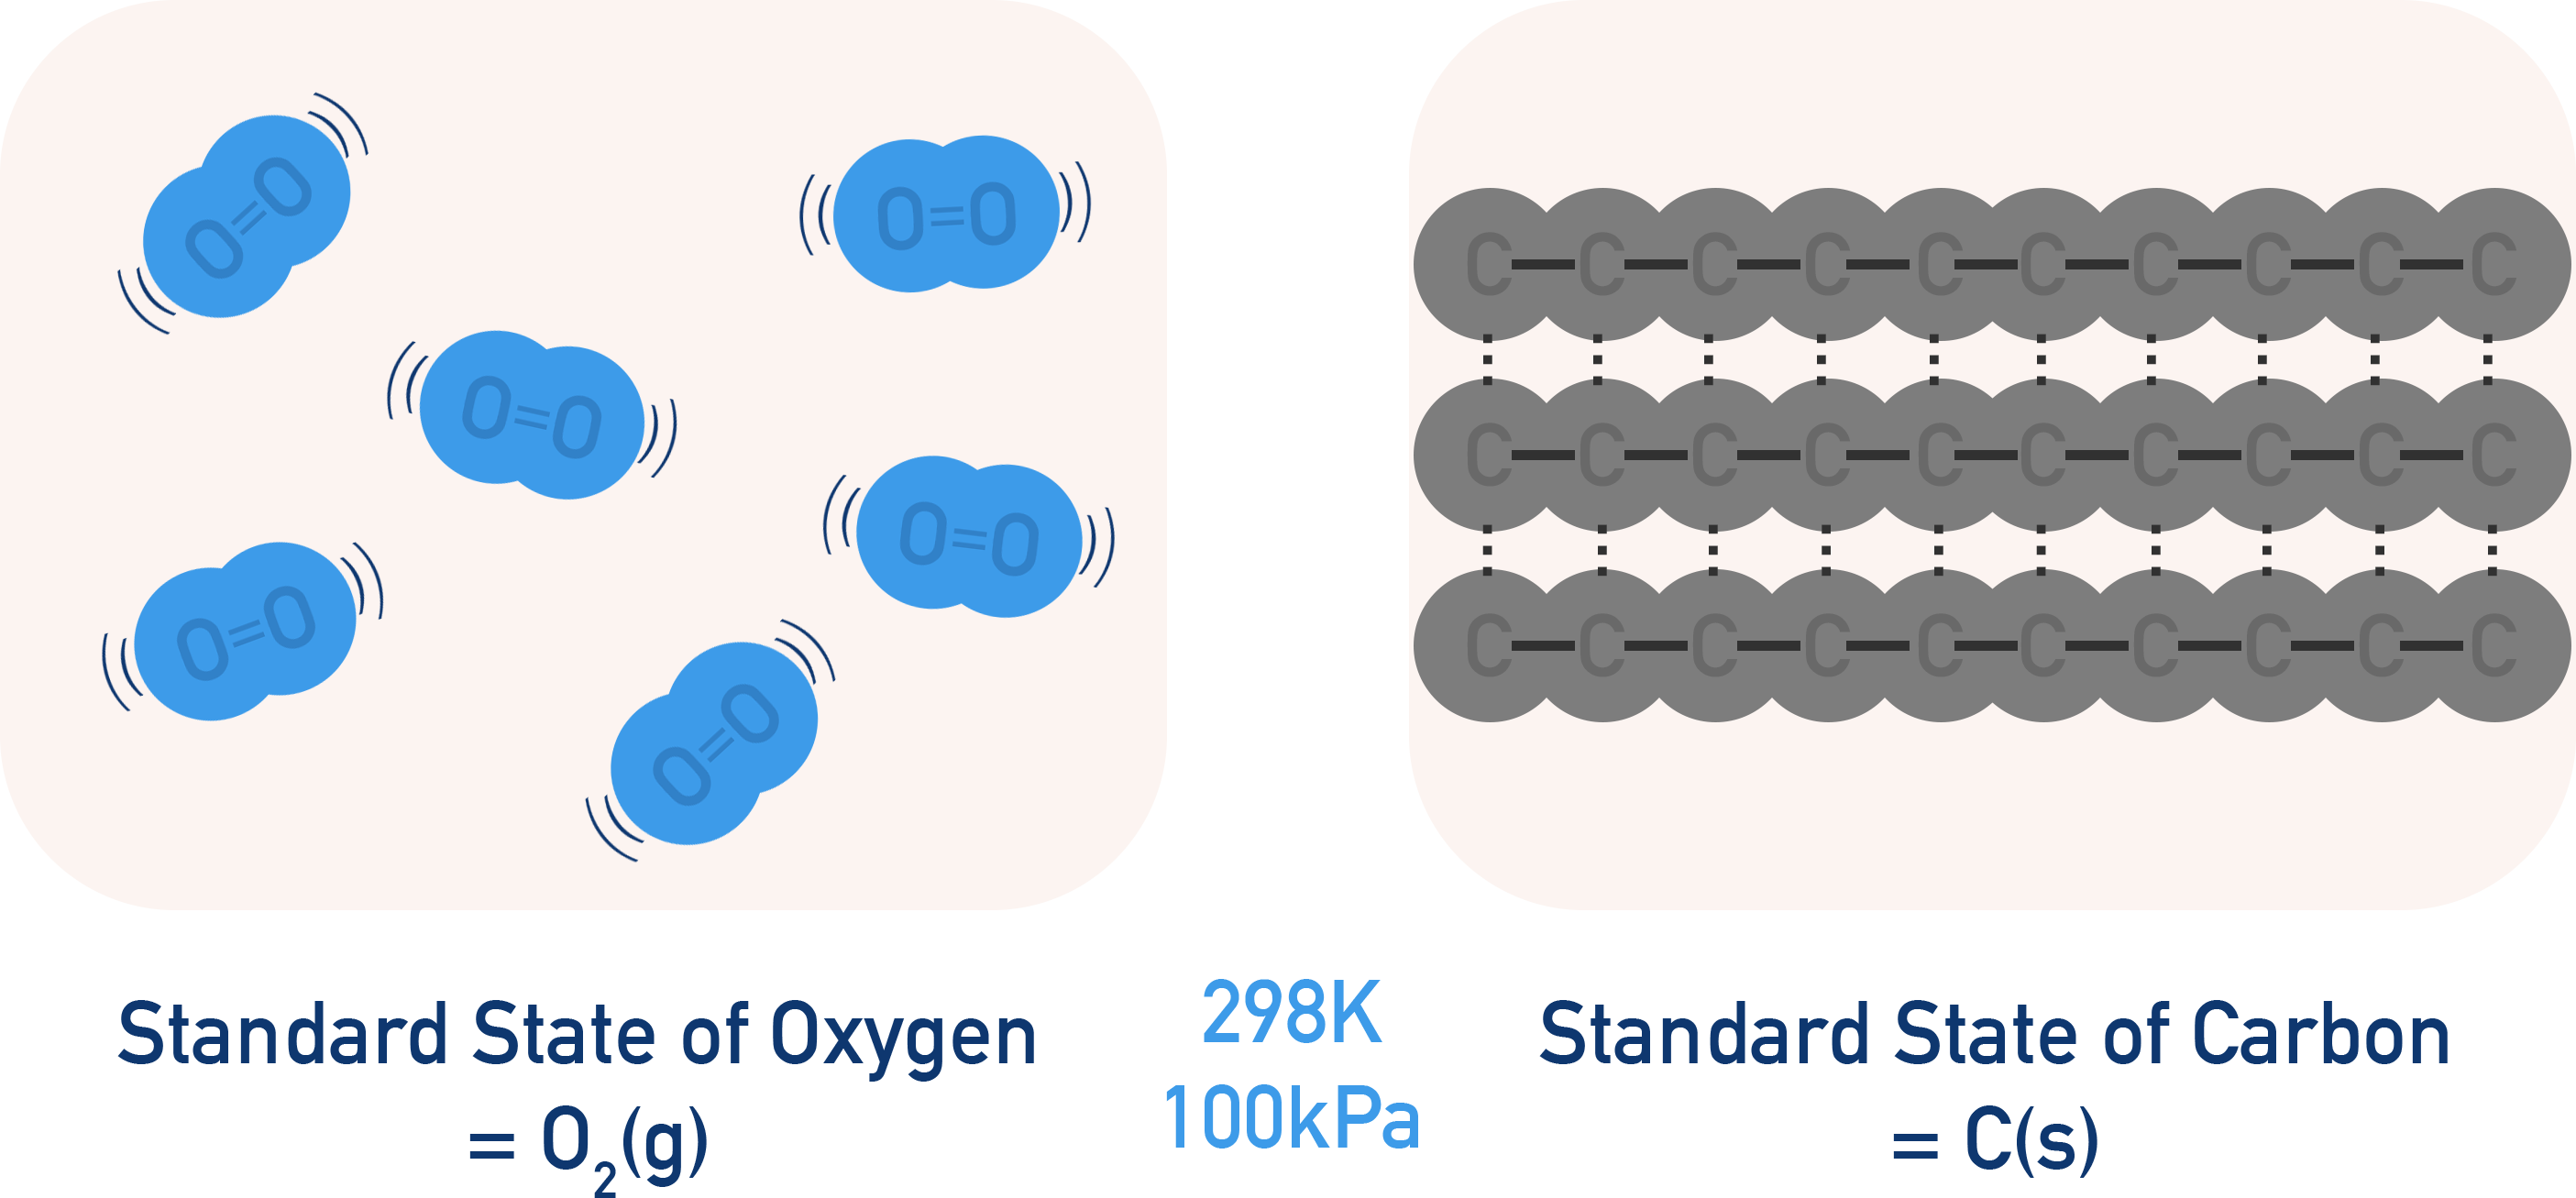 Standard states of oxygen and carbon a-level chemistry